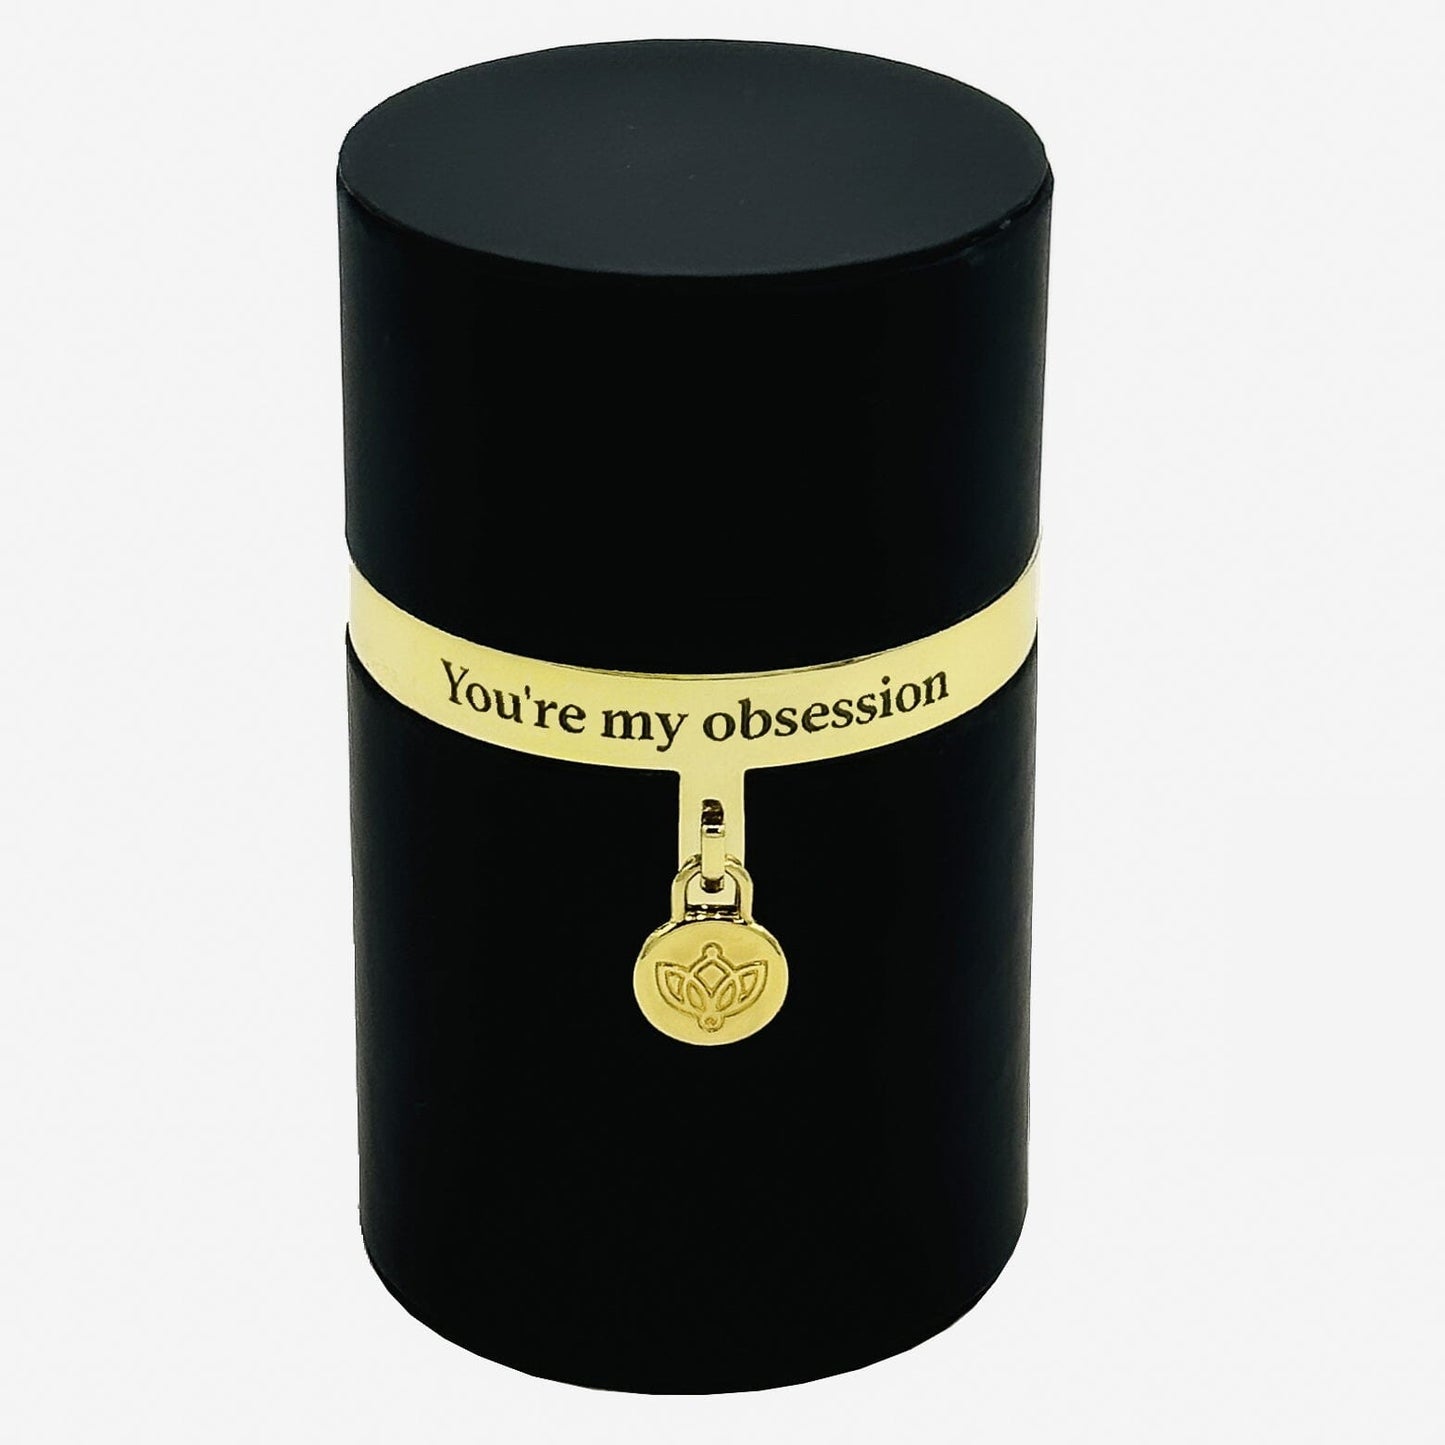 One in a Million™ Round Black Box | You are my obsession | Red Rose